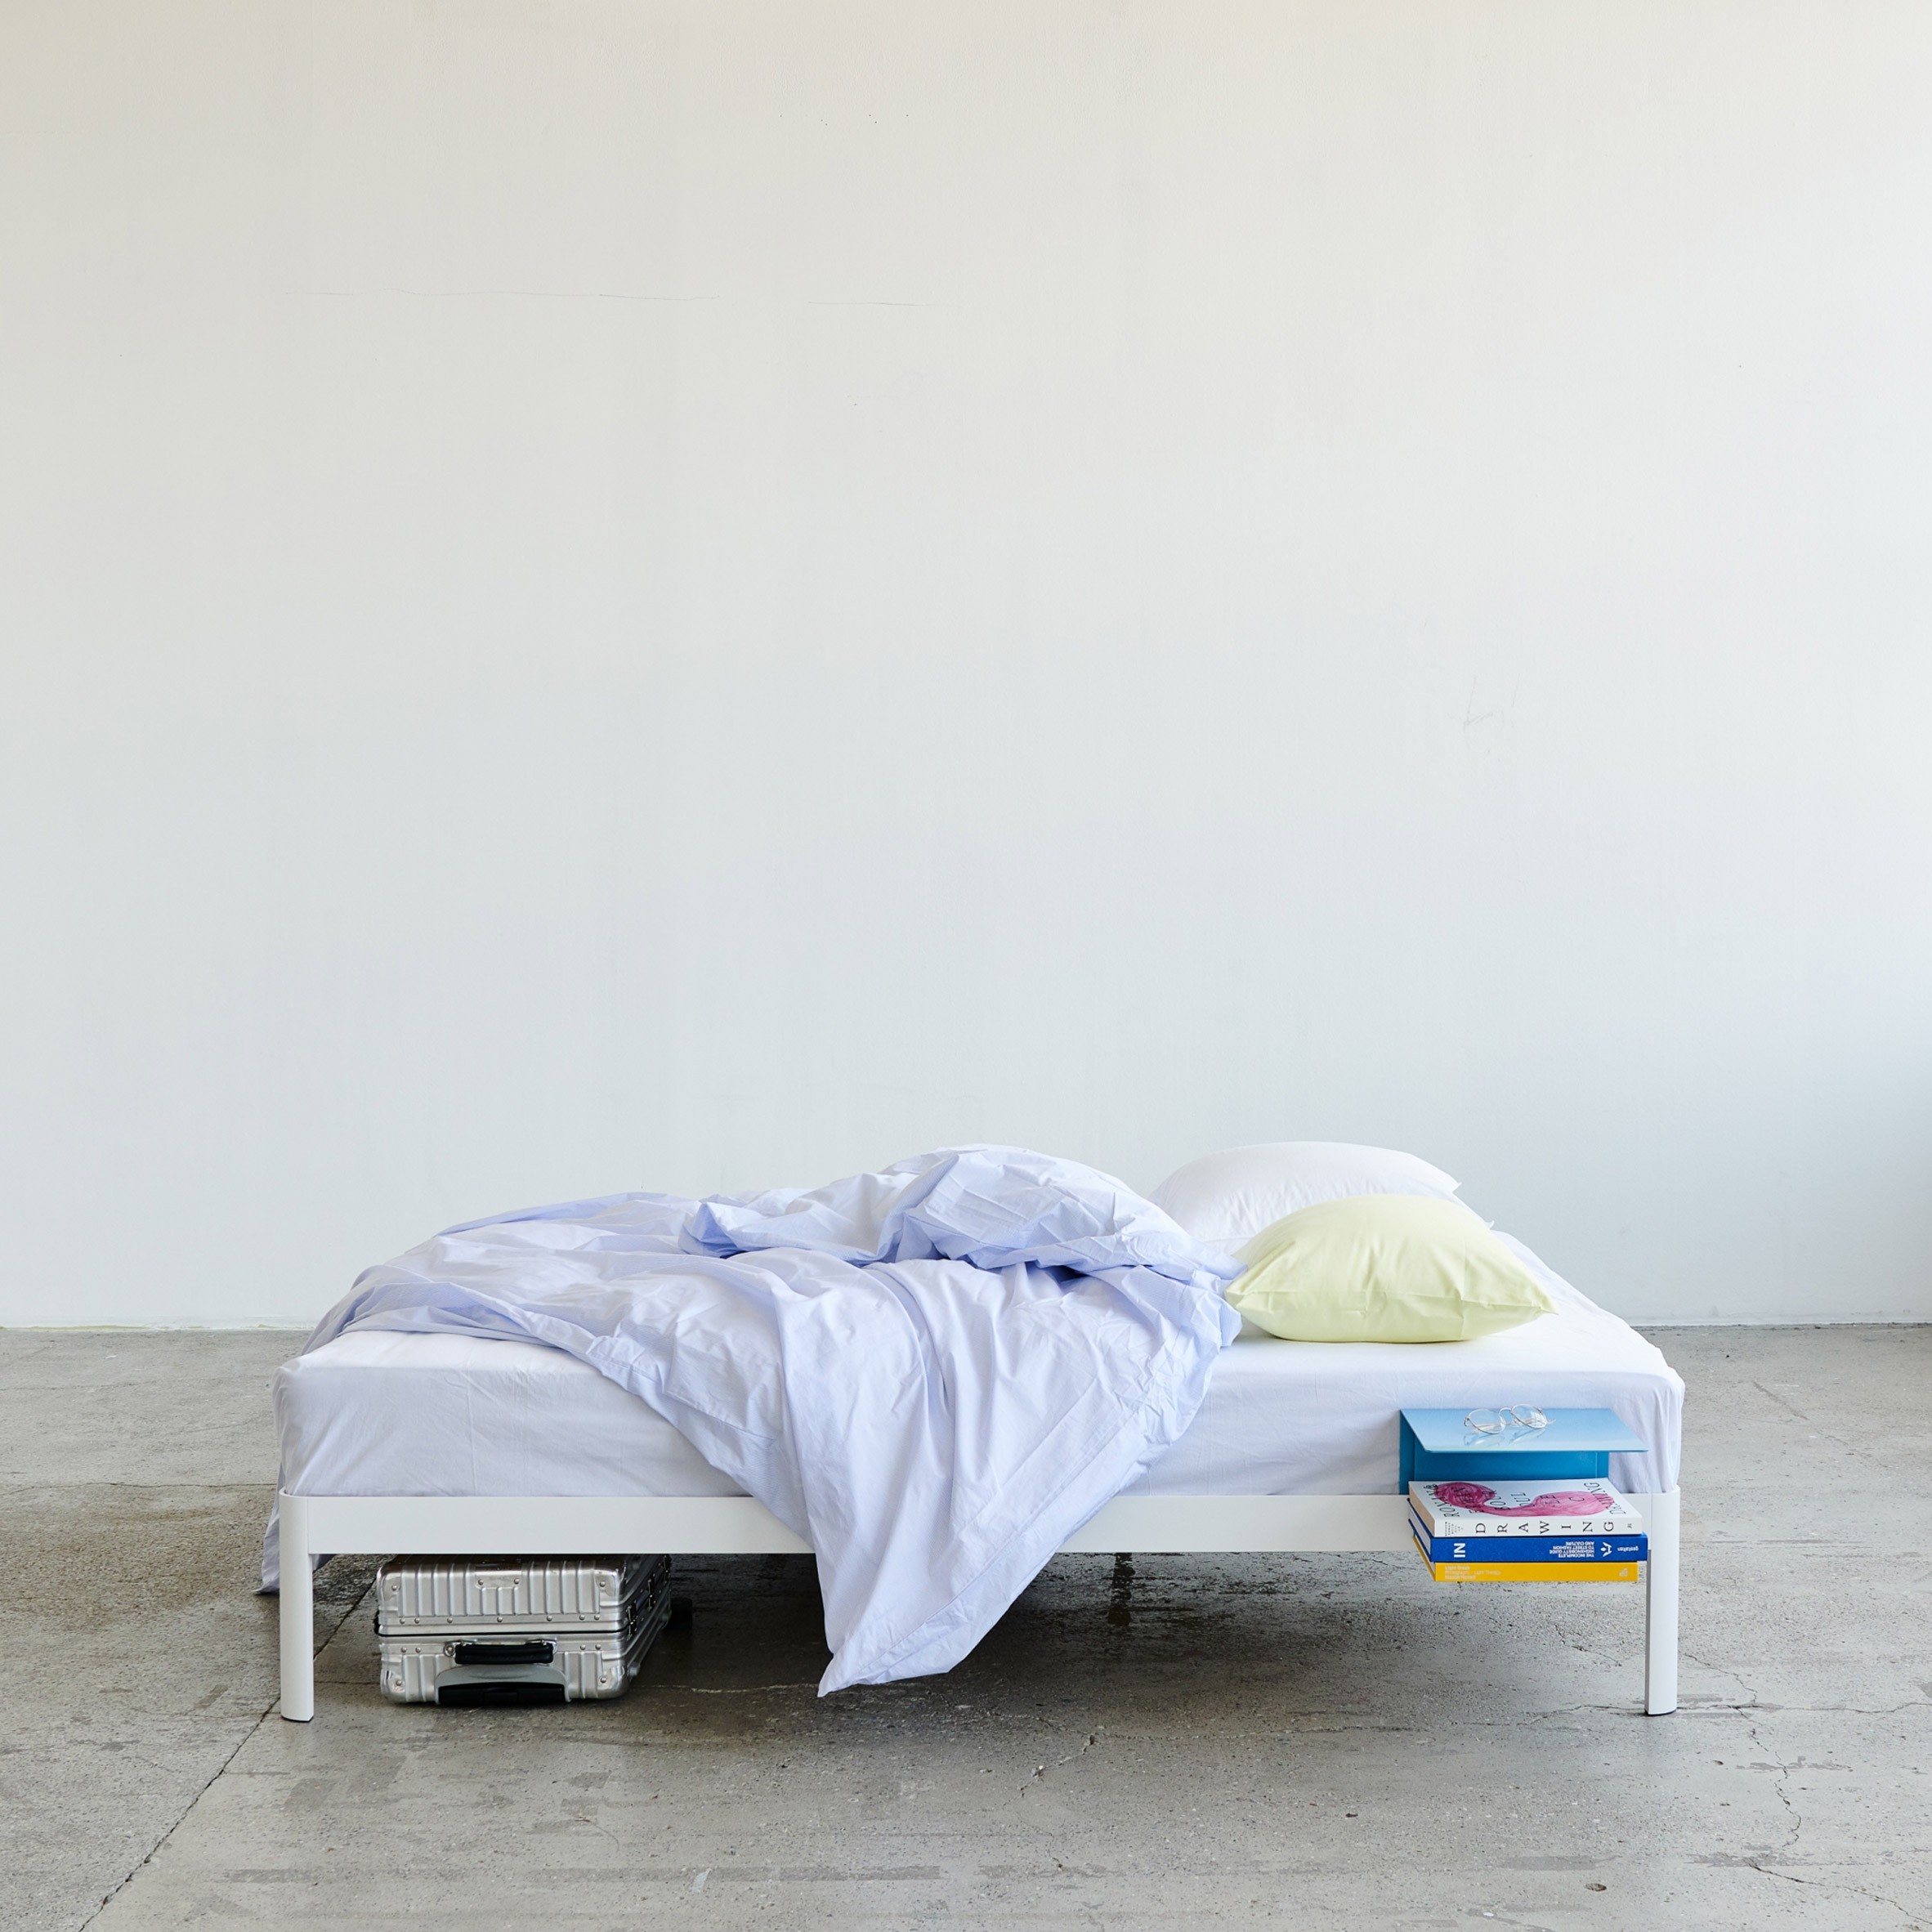 ontwikkelen niemand Megalopolis Tim Rundle designs modular "bed for life" motivated by circular economy